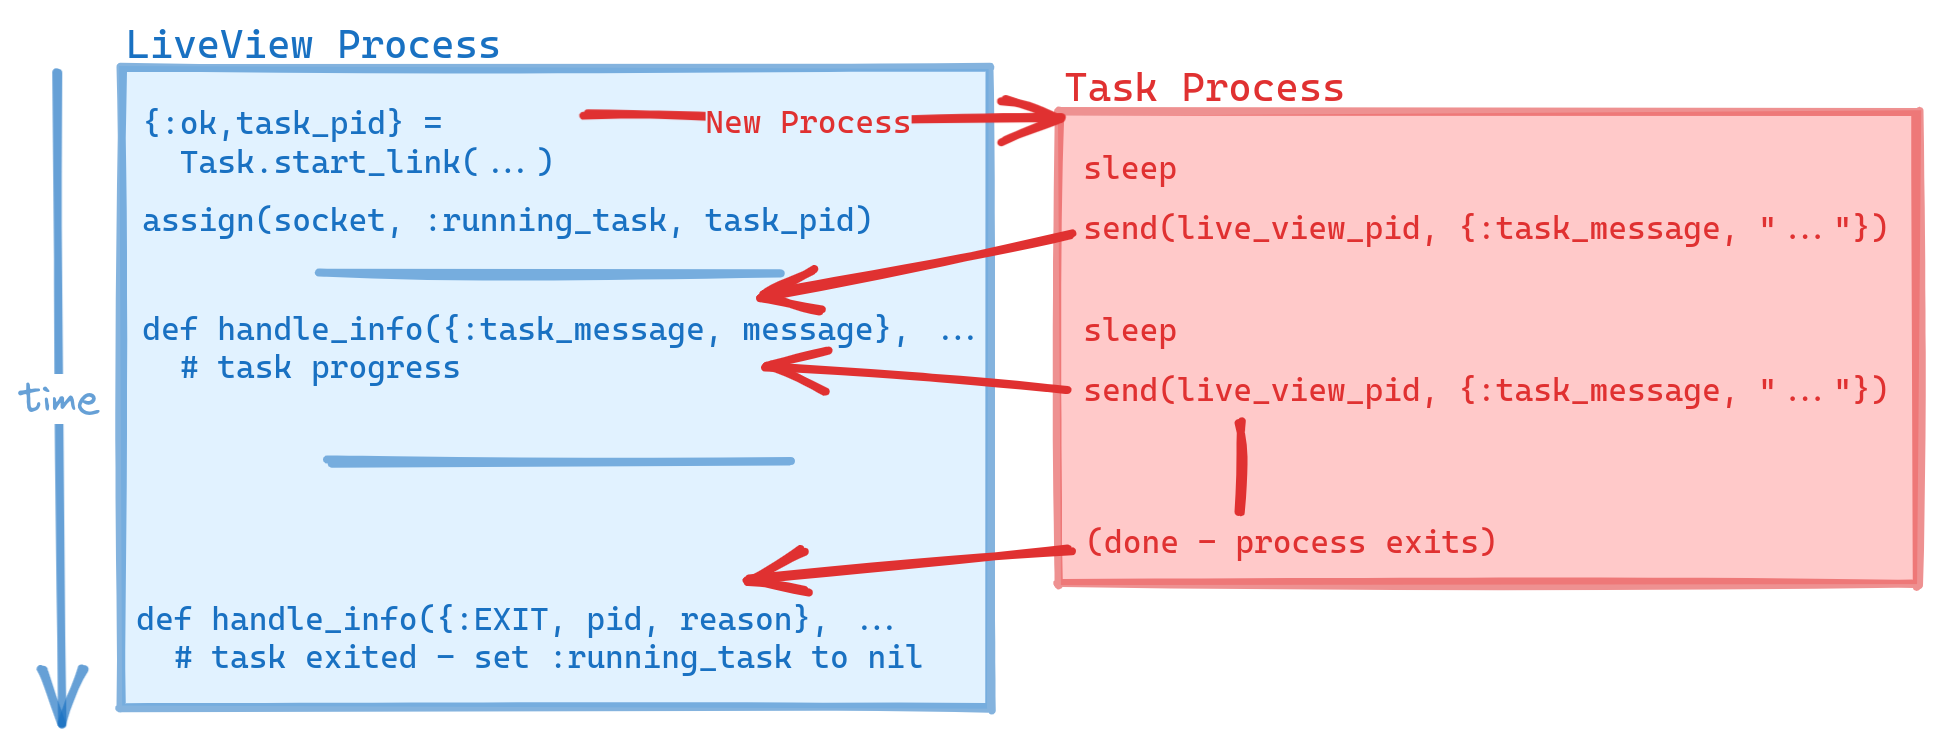 Diagram showing the LiveView process on the left launching a Task process to the right. The messages sent by the Task are handled in the LiveView.